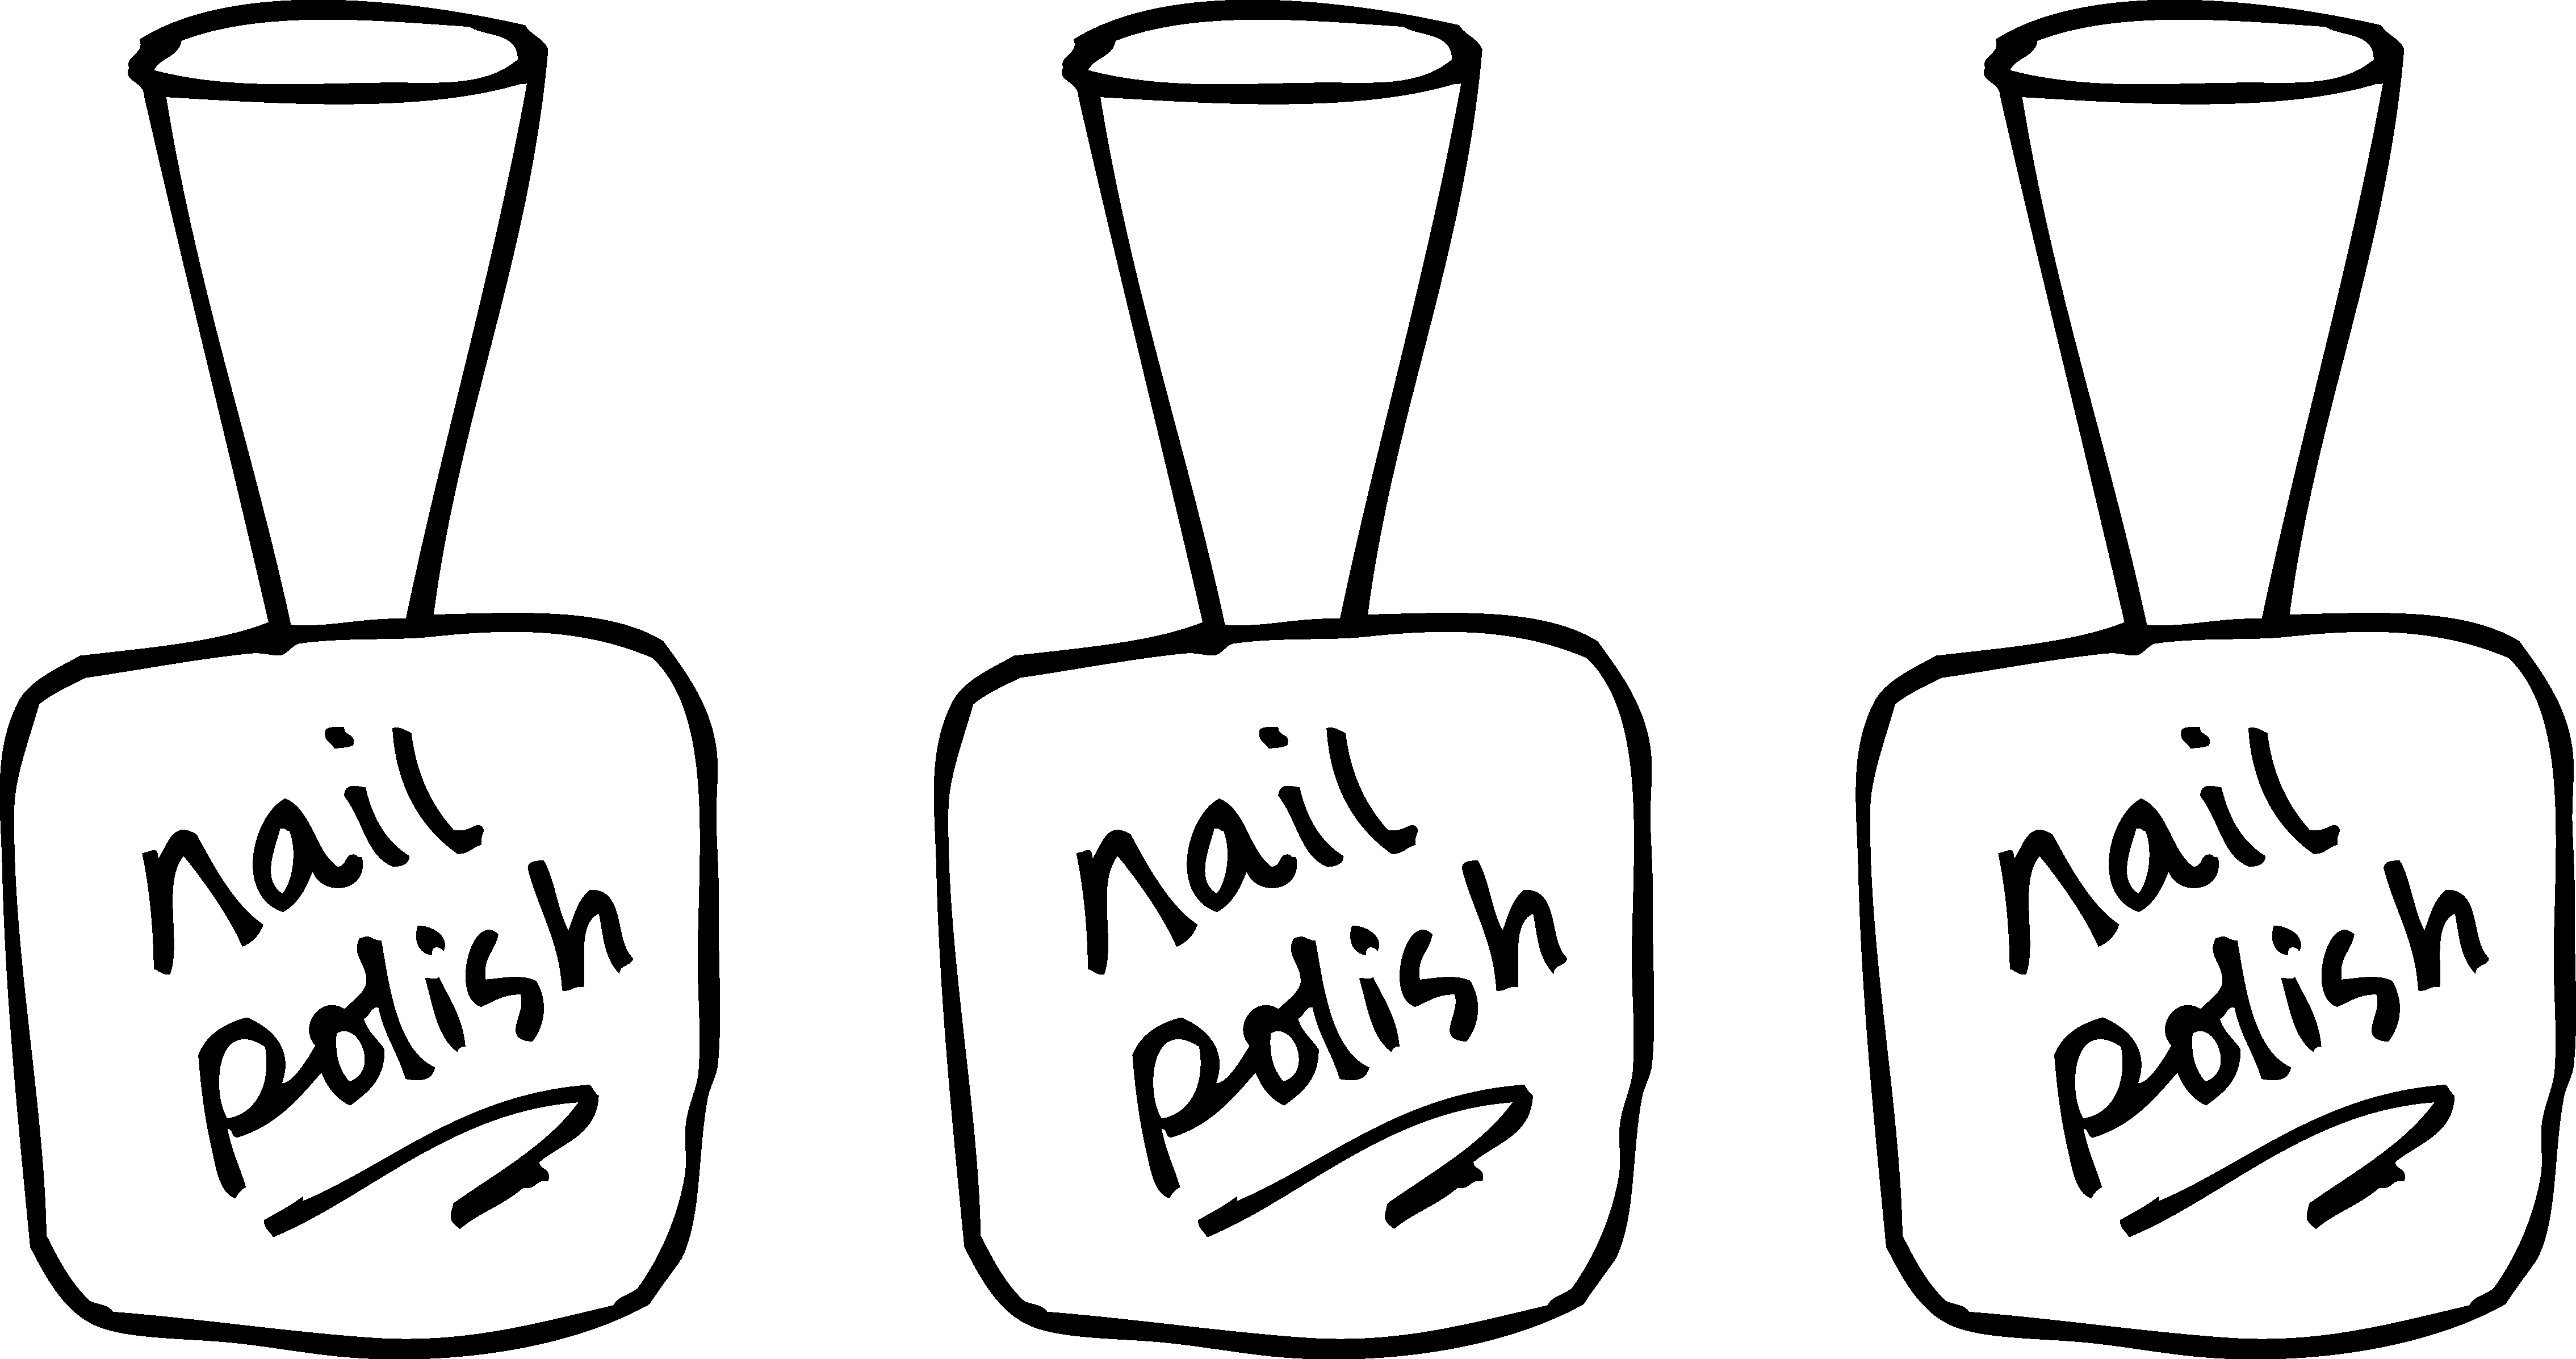 Nail polish coloring page. Worry clipart black and white